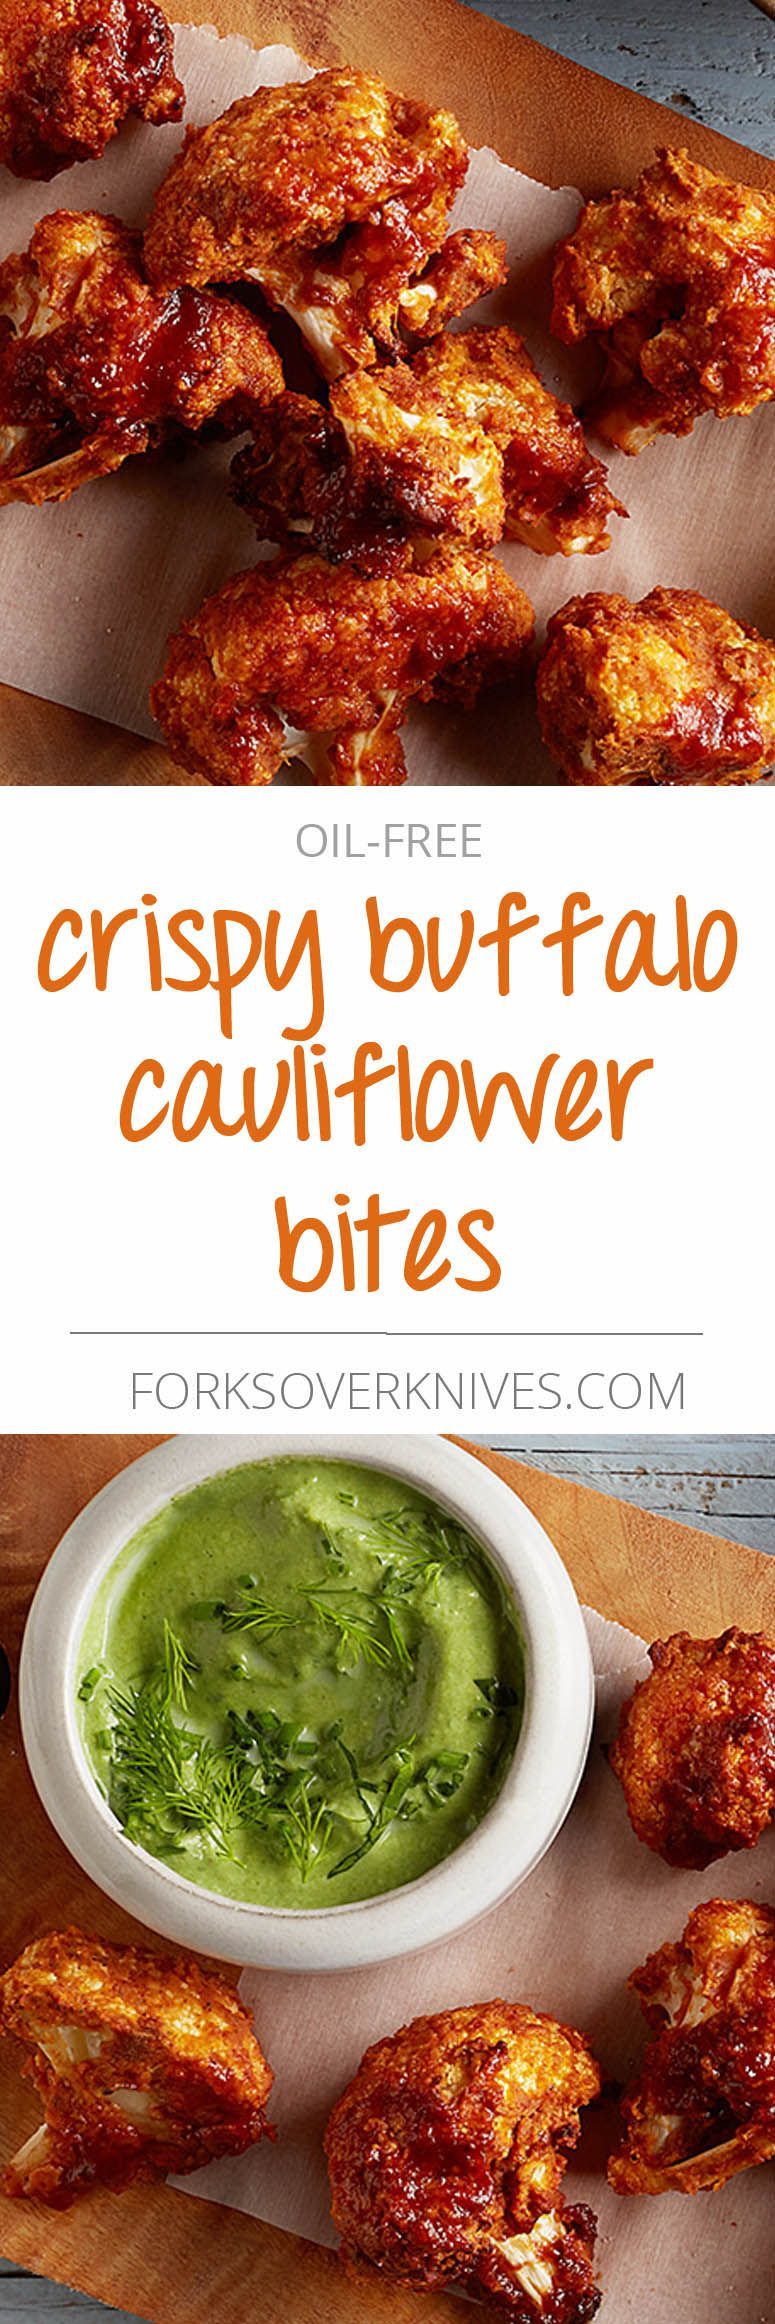 This recipe came together after a lot of trial and error. The trick to making oil-free cauliflower crispy (and for it to stay that